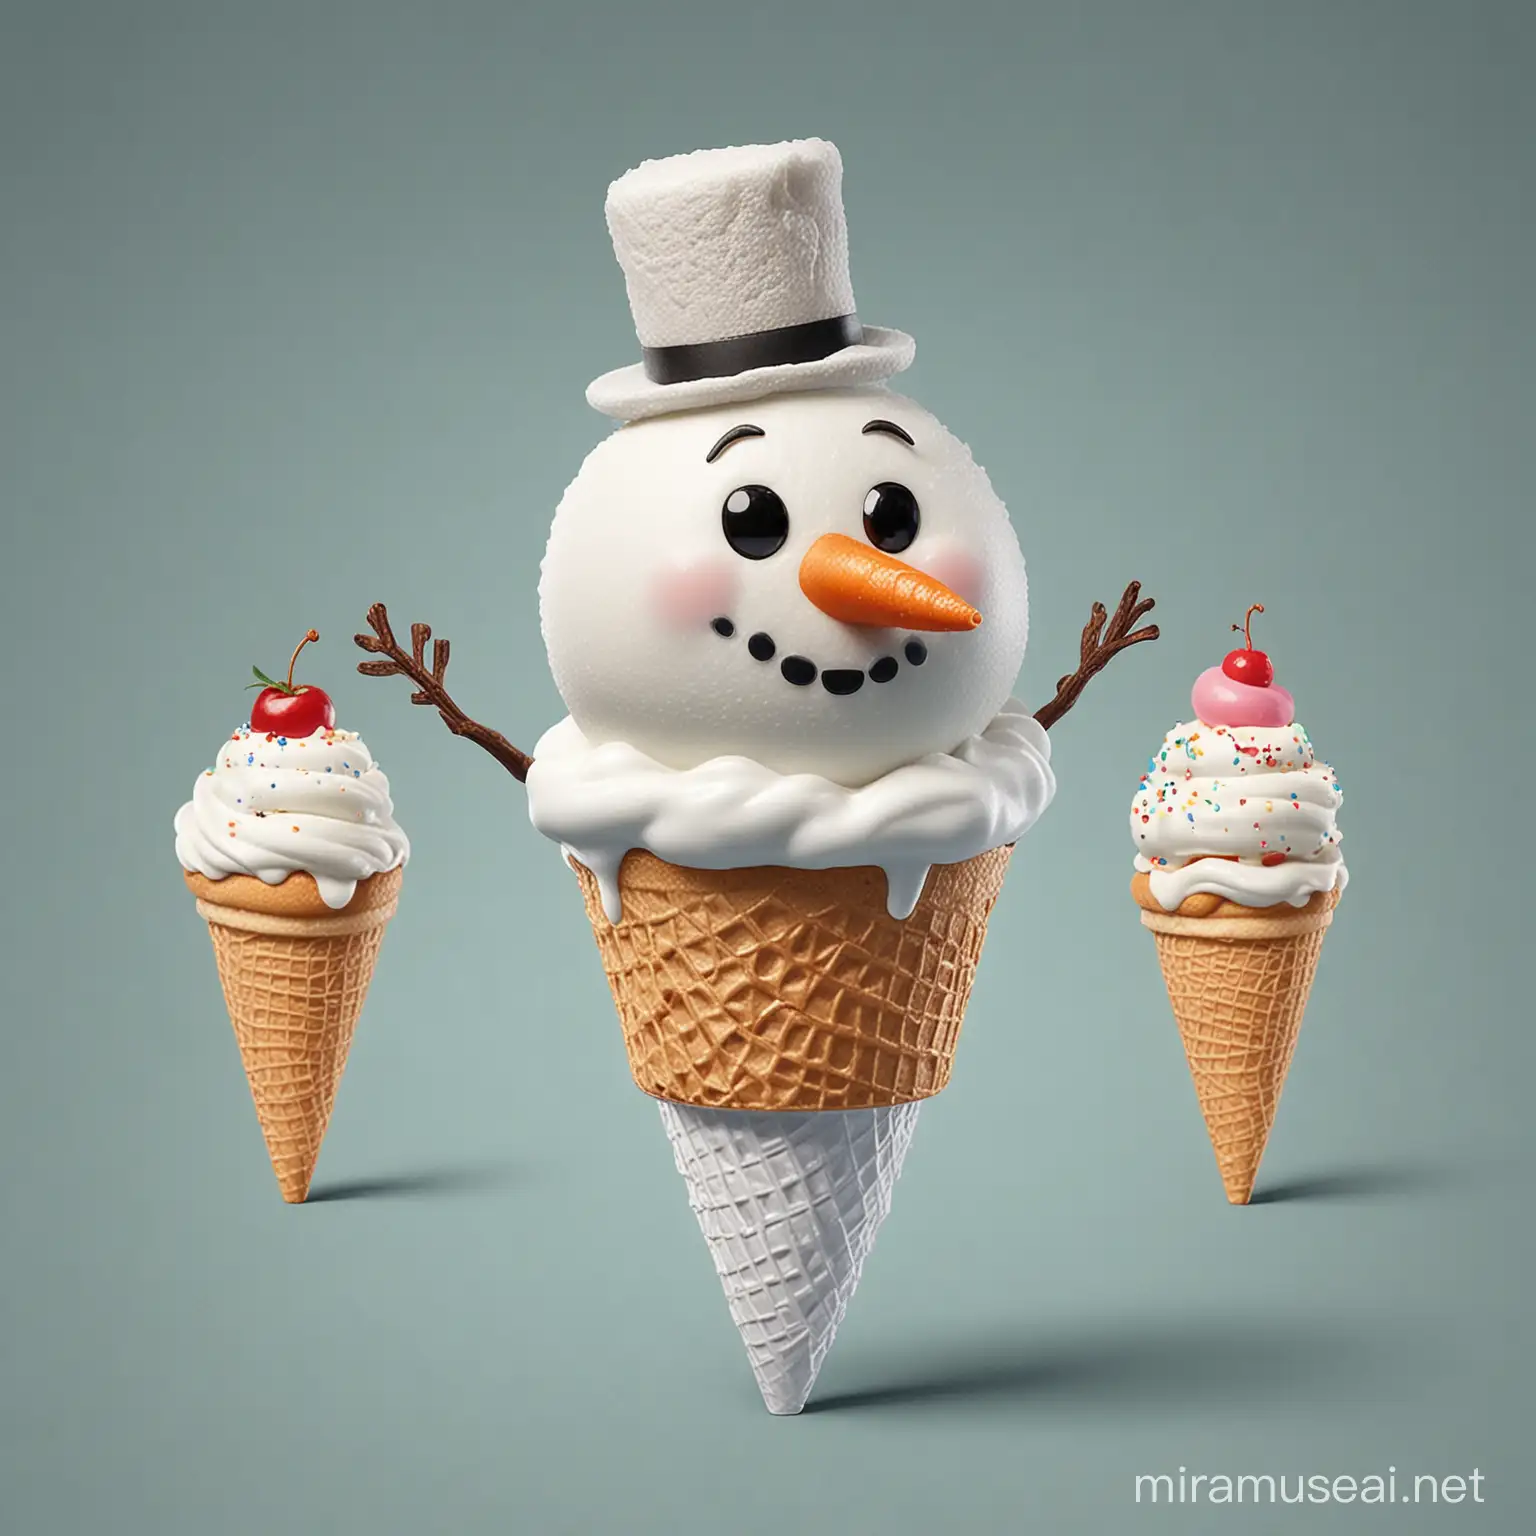 Whimsical Snowman and Soft Serve Delight at ChillOut Tasty Treats